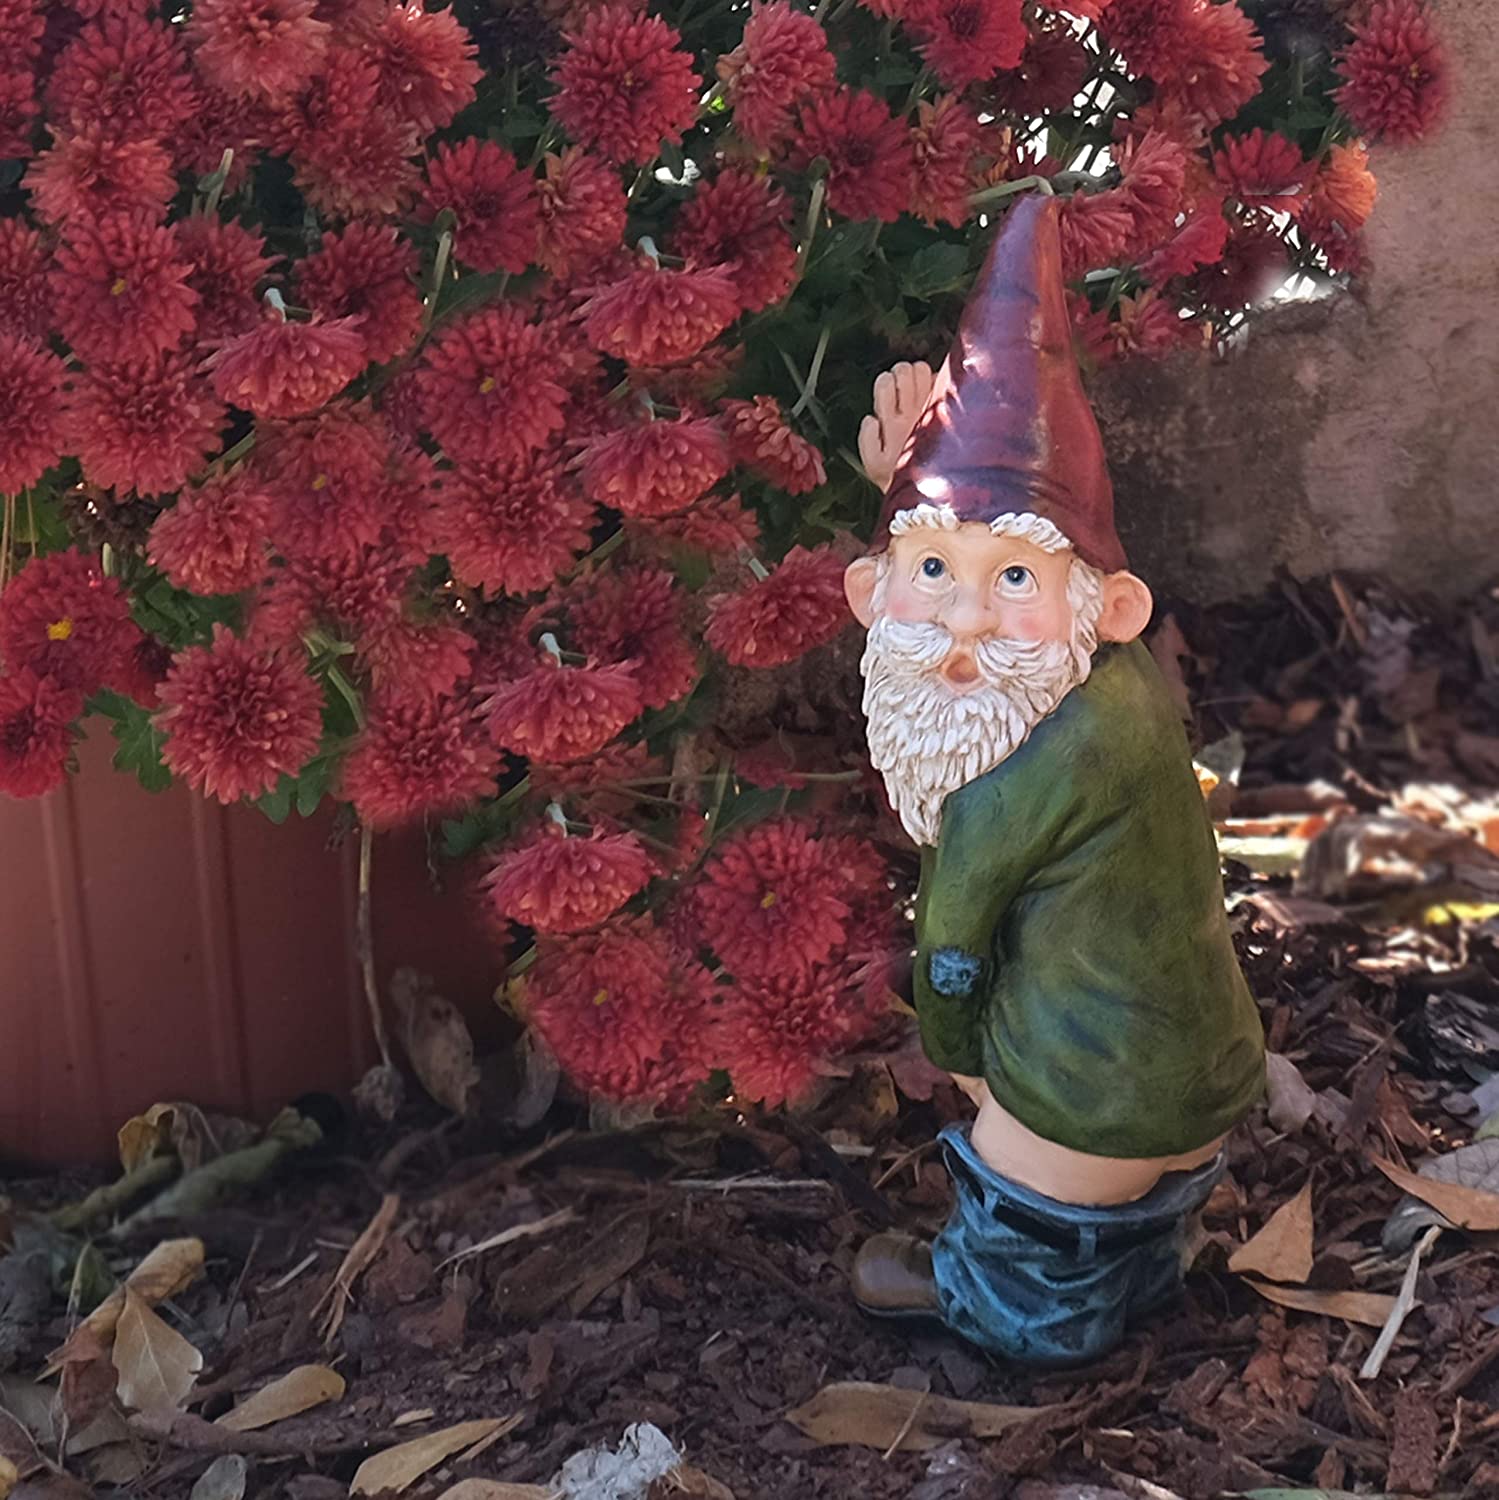 Bella Haus Design Peeing Gnome - 10.3" Tall Polyresin - Naughty Garden Gnome for Lawn Ornaments, Indoor or Outdoor Decorations - Red and Green Funny Flashing Gnomes